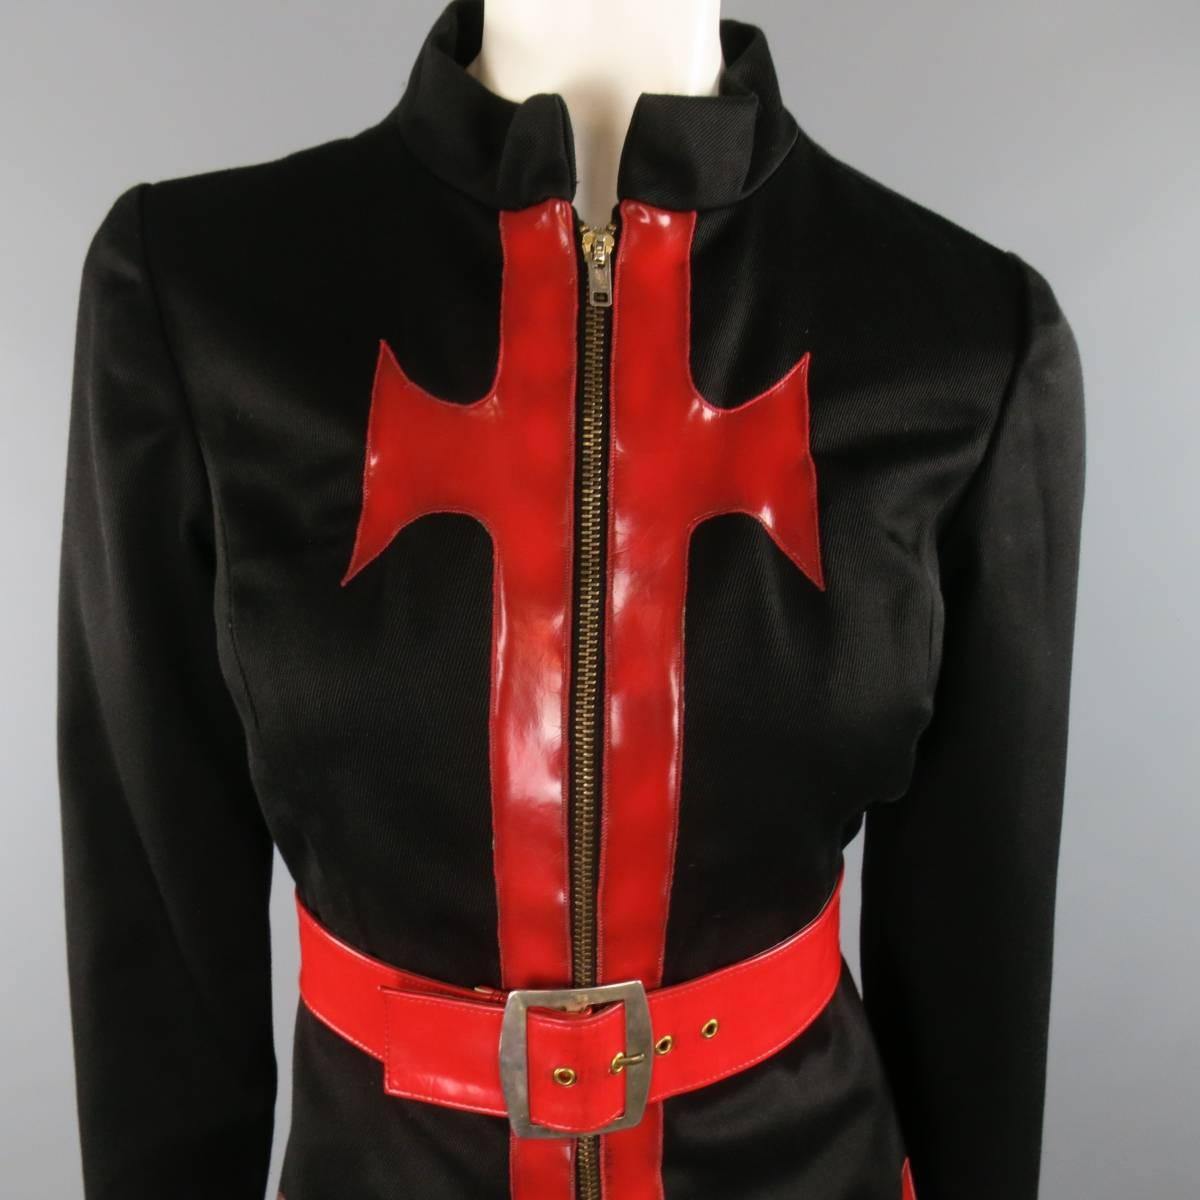 Rare 1970's vintage OSCAR DE LA RENTA BOUTIQUE label coat comes in a heavy black wtill and features a band collar, zip closure front, and red patent leather Gothic cross details. Wear and discolorations throughout patent details and belt.  As-Is.
